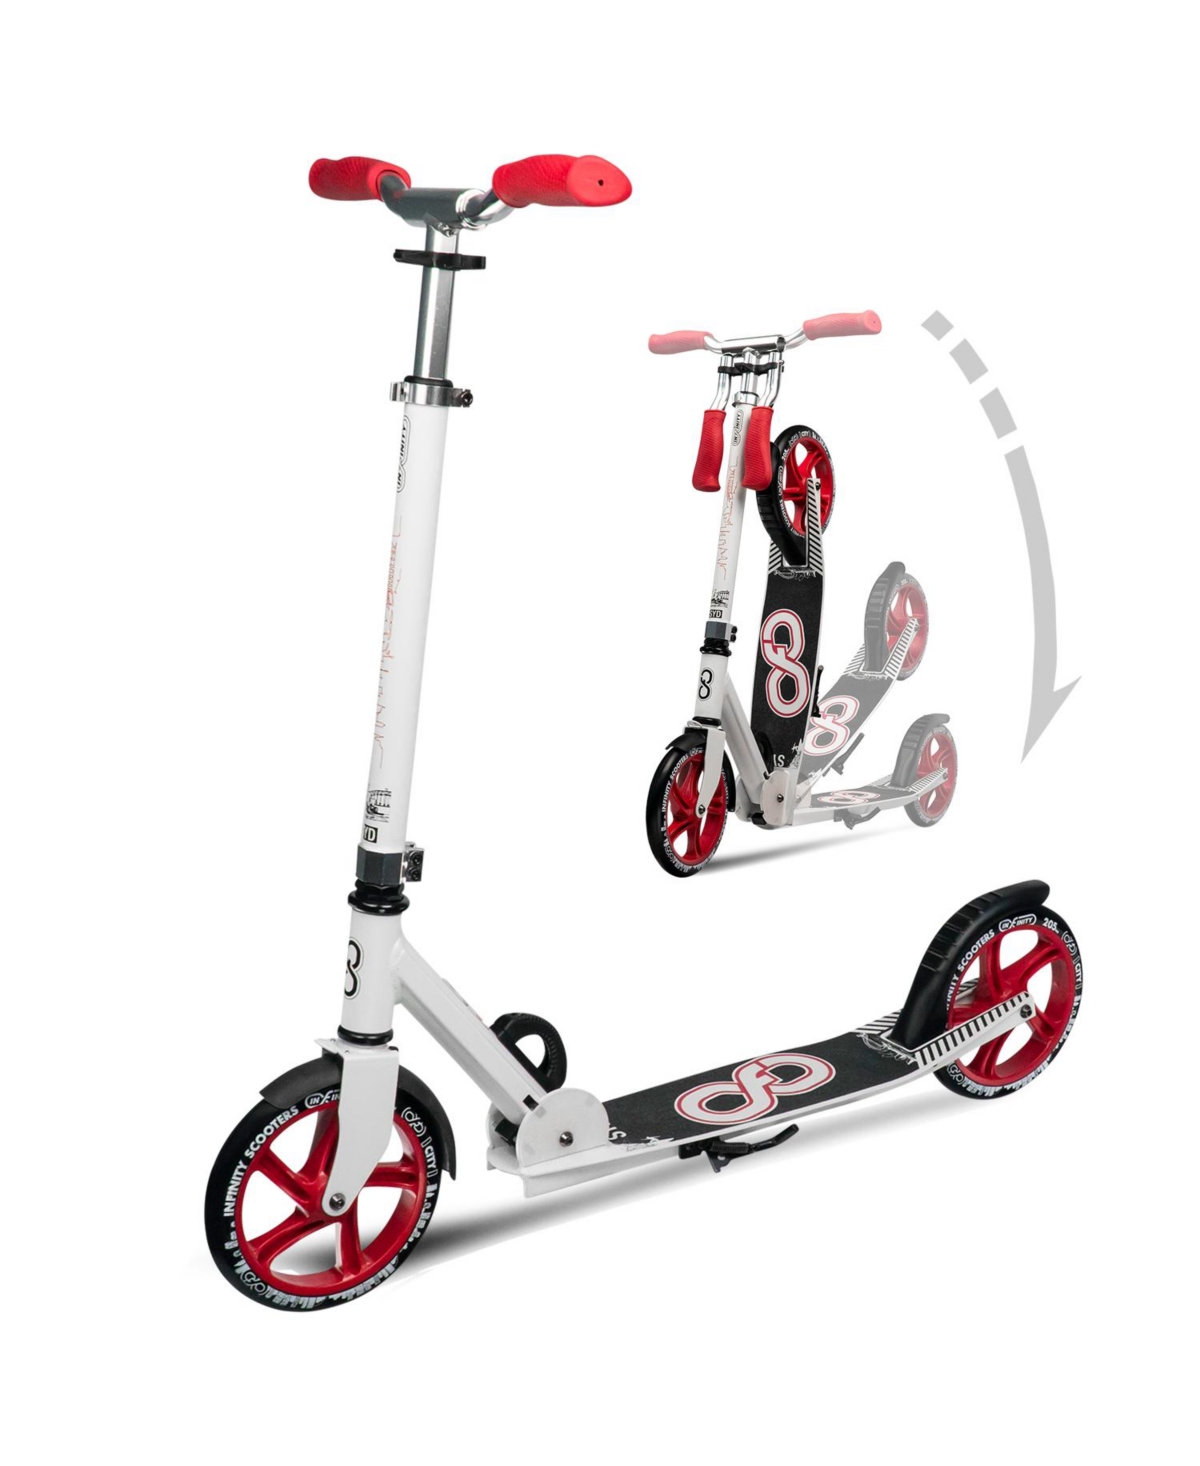 Sydney Foldable Kick Scooter - Great Scooters For Teens And Adults - White